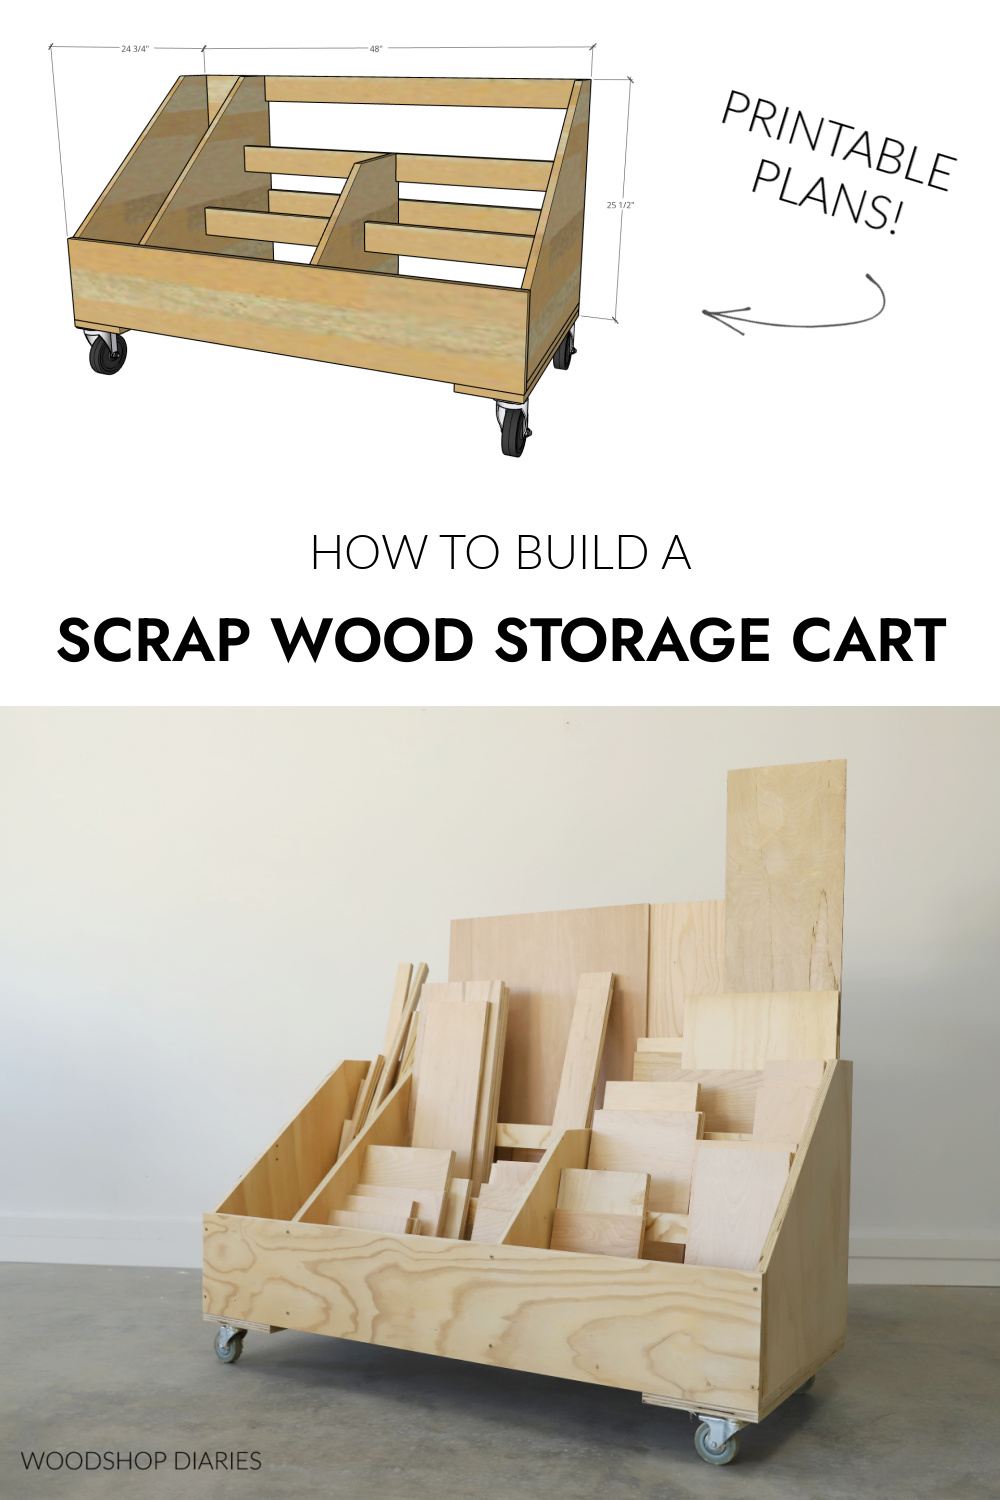 Pinterest collage image showing overall dimensional diagram at top and full scrap wood cart at bottom with text "How to build a scrap wood storage cart printable plans"